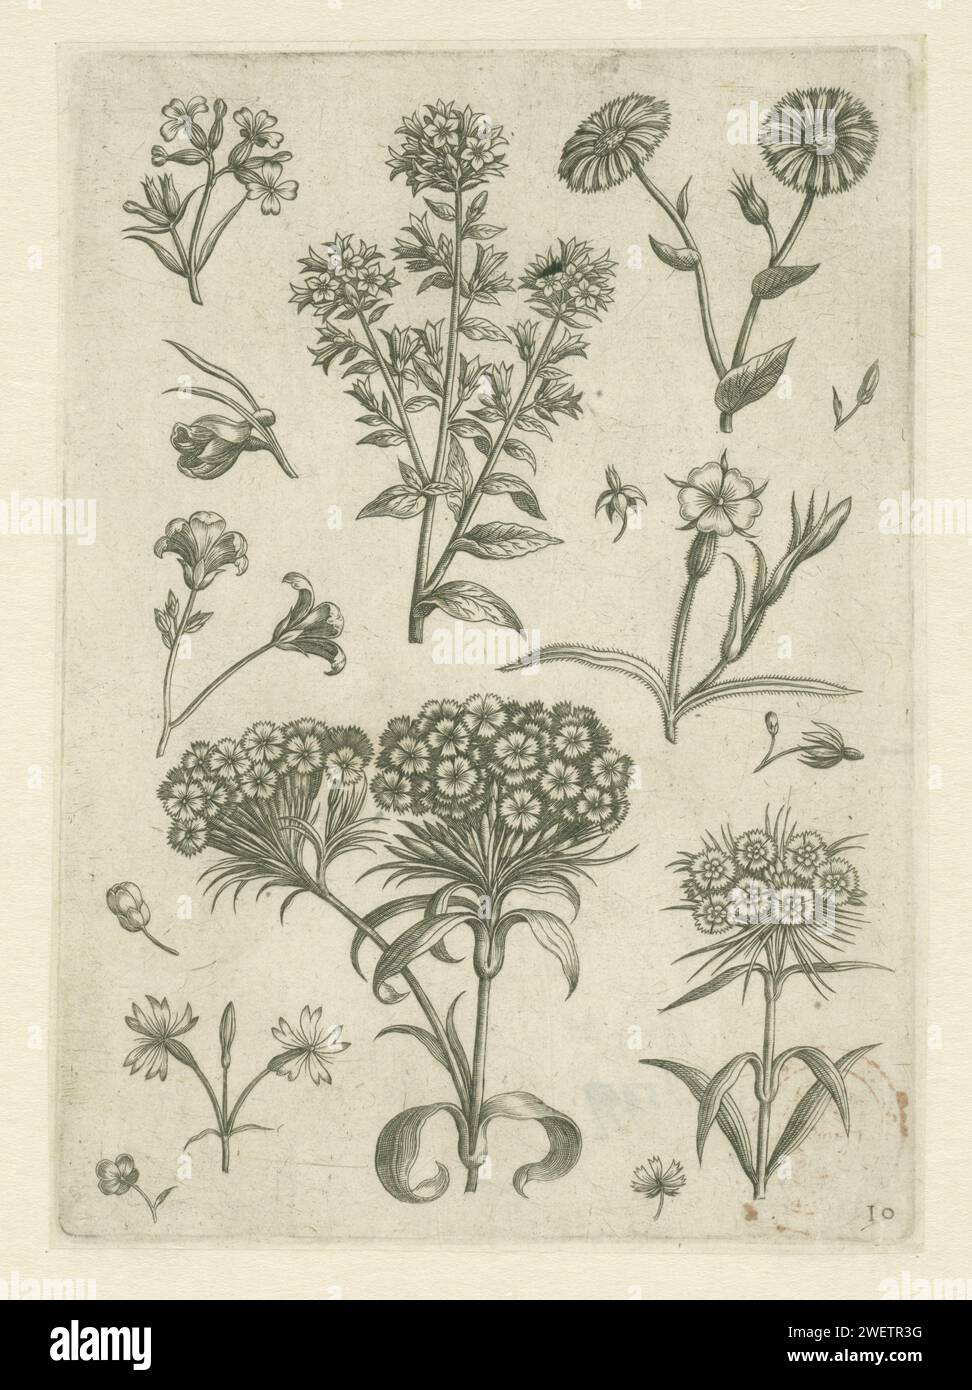 Thousand beauty and other flowers, 1570 - Before 1618 print Leaf 10 of 21 numbered sheets with title page from a series of 24.  paper engraving flowers Stock Photo